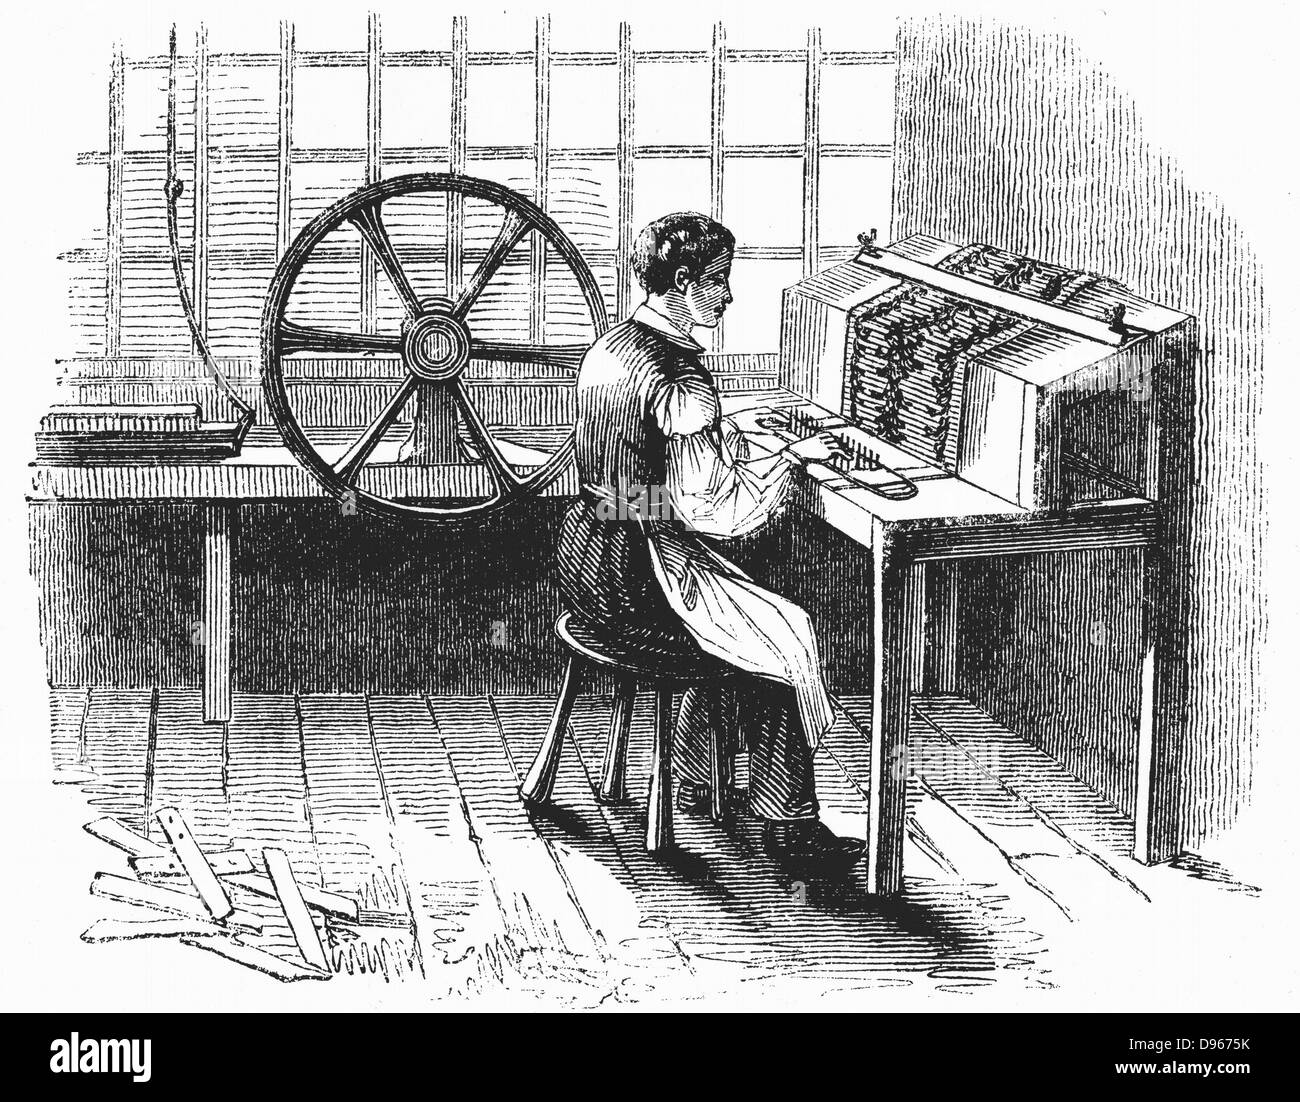 Man operating machine for punching cards for Jacquard looms. Card for each weft thread of pattern. 400-800 normal, but sometimes 24,000 were worked. From George Dodd 'The Textile Manufactures of Great Britain', London, 1844. Engraving Stock Photo